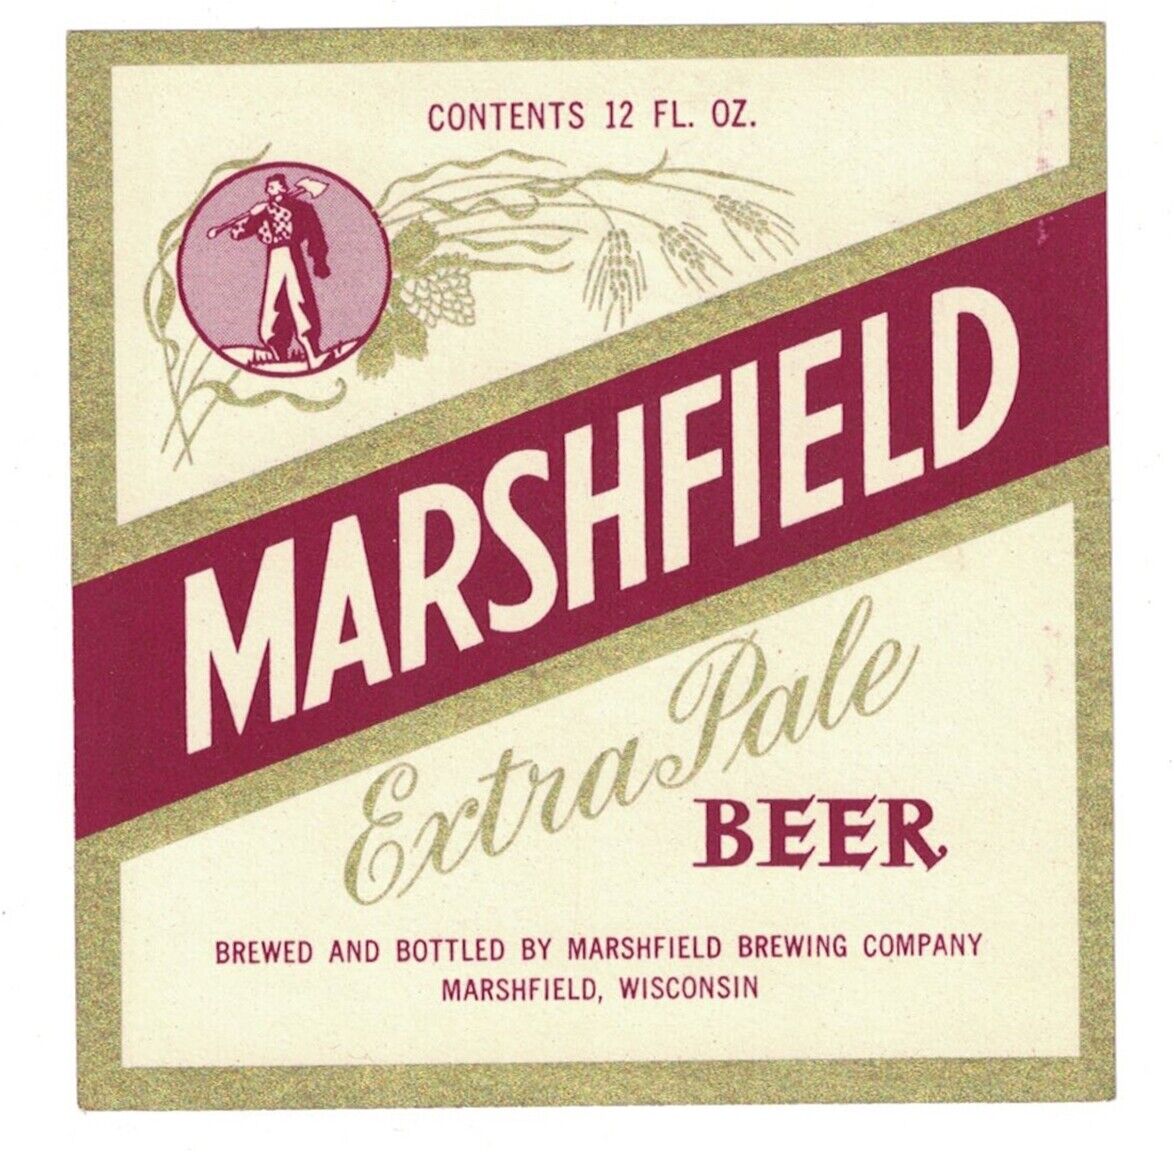 Marshfield Extra Pale Ale Beer Label